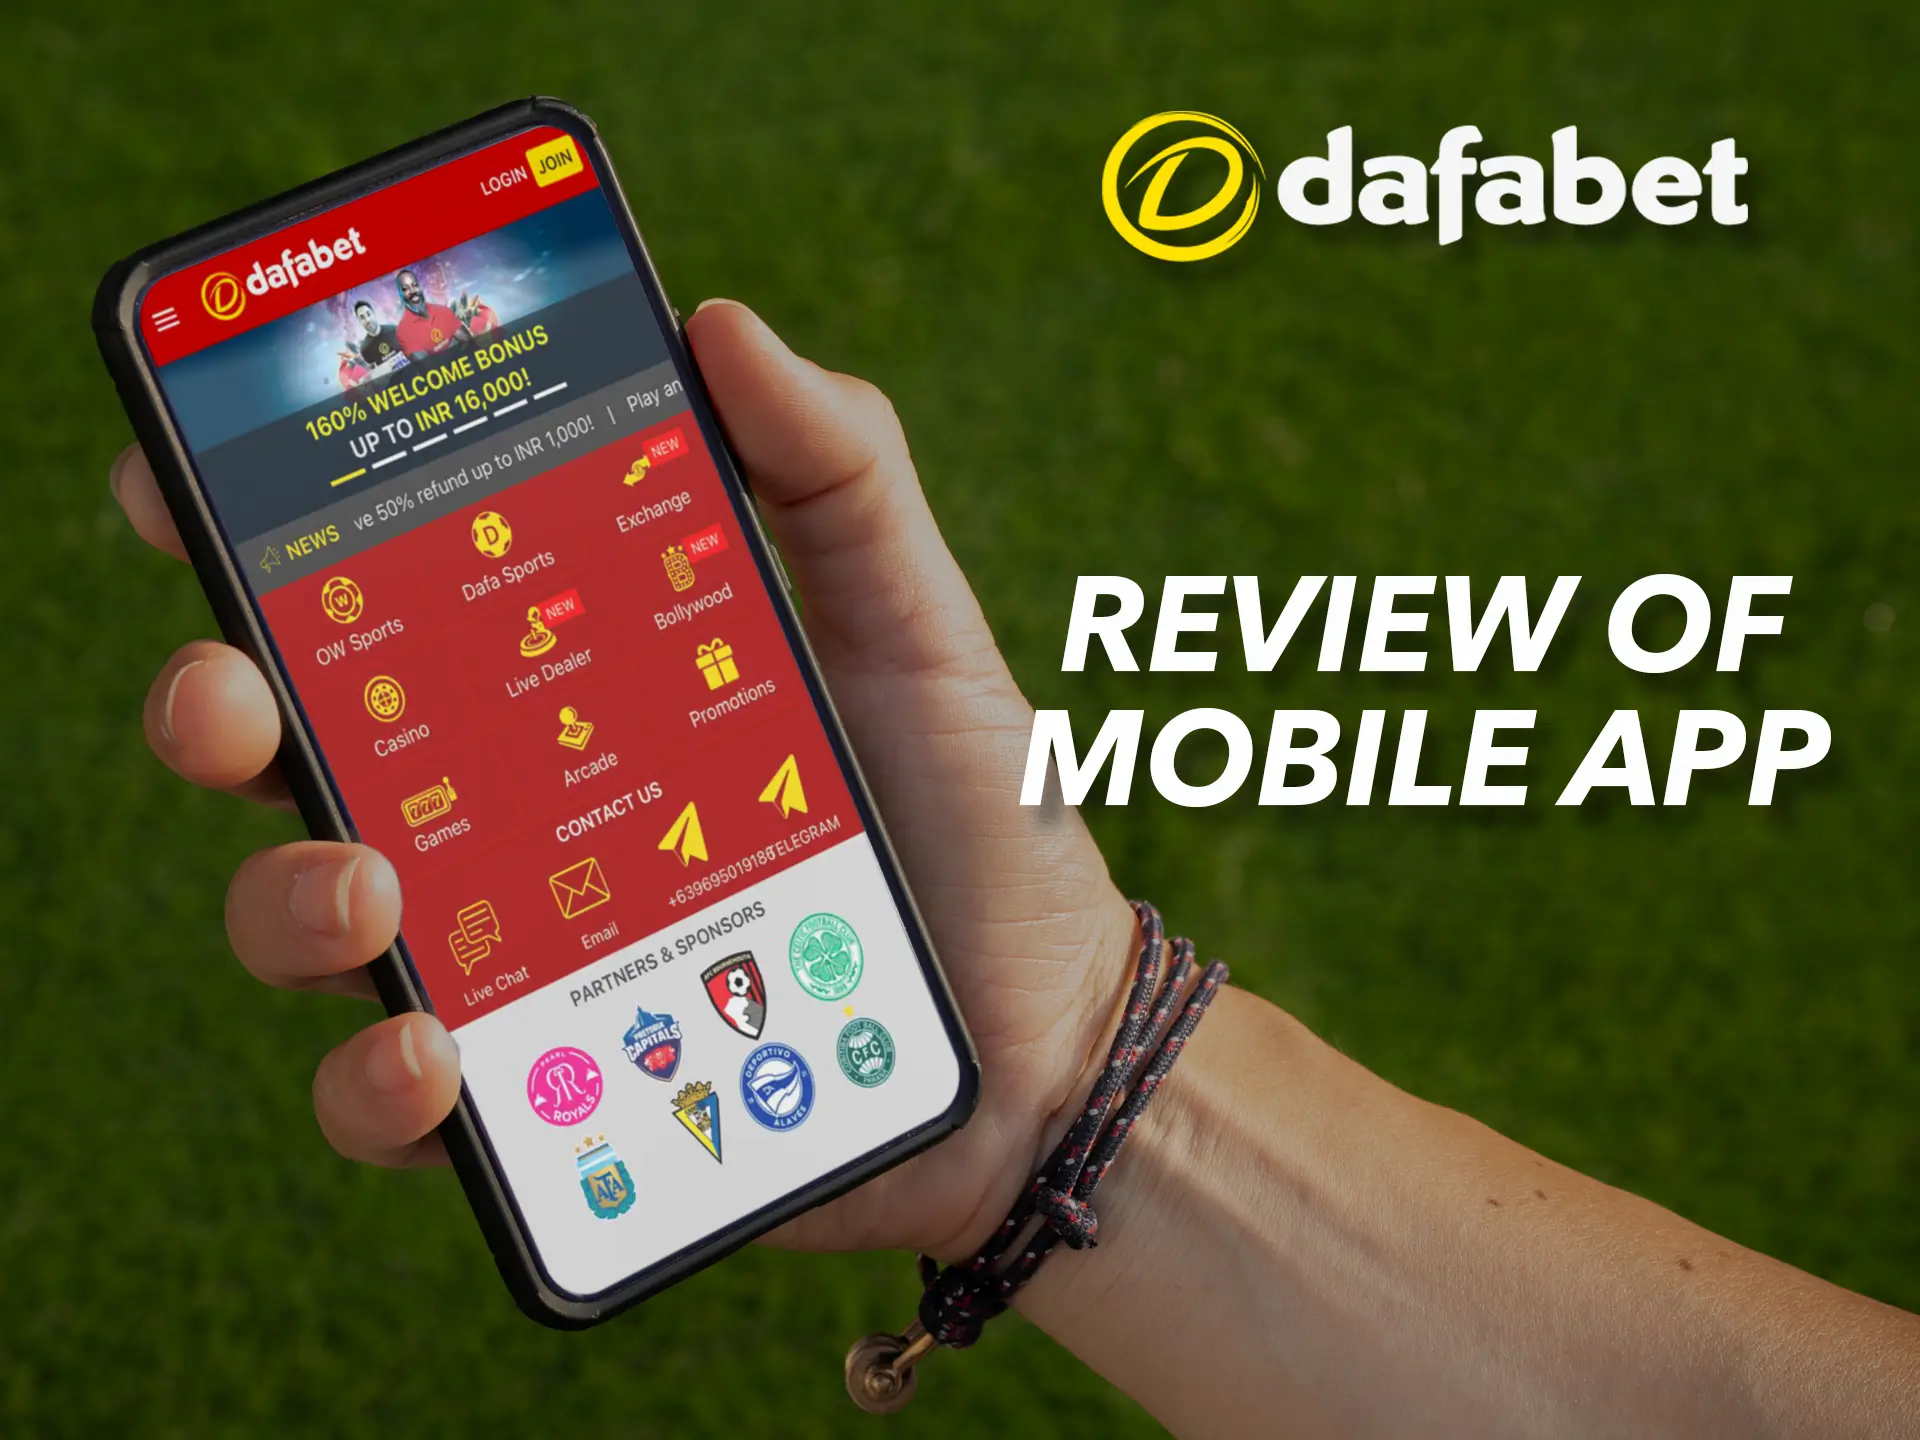 The Dafabet app has a user-friendly and modern interface.